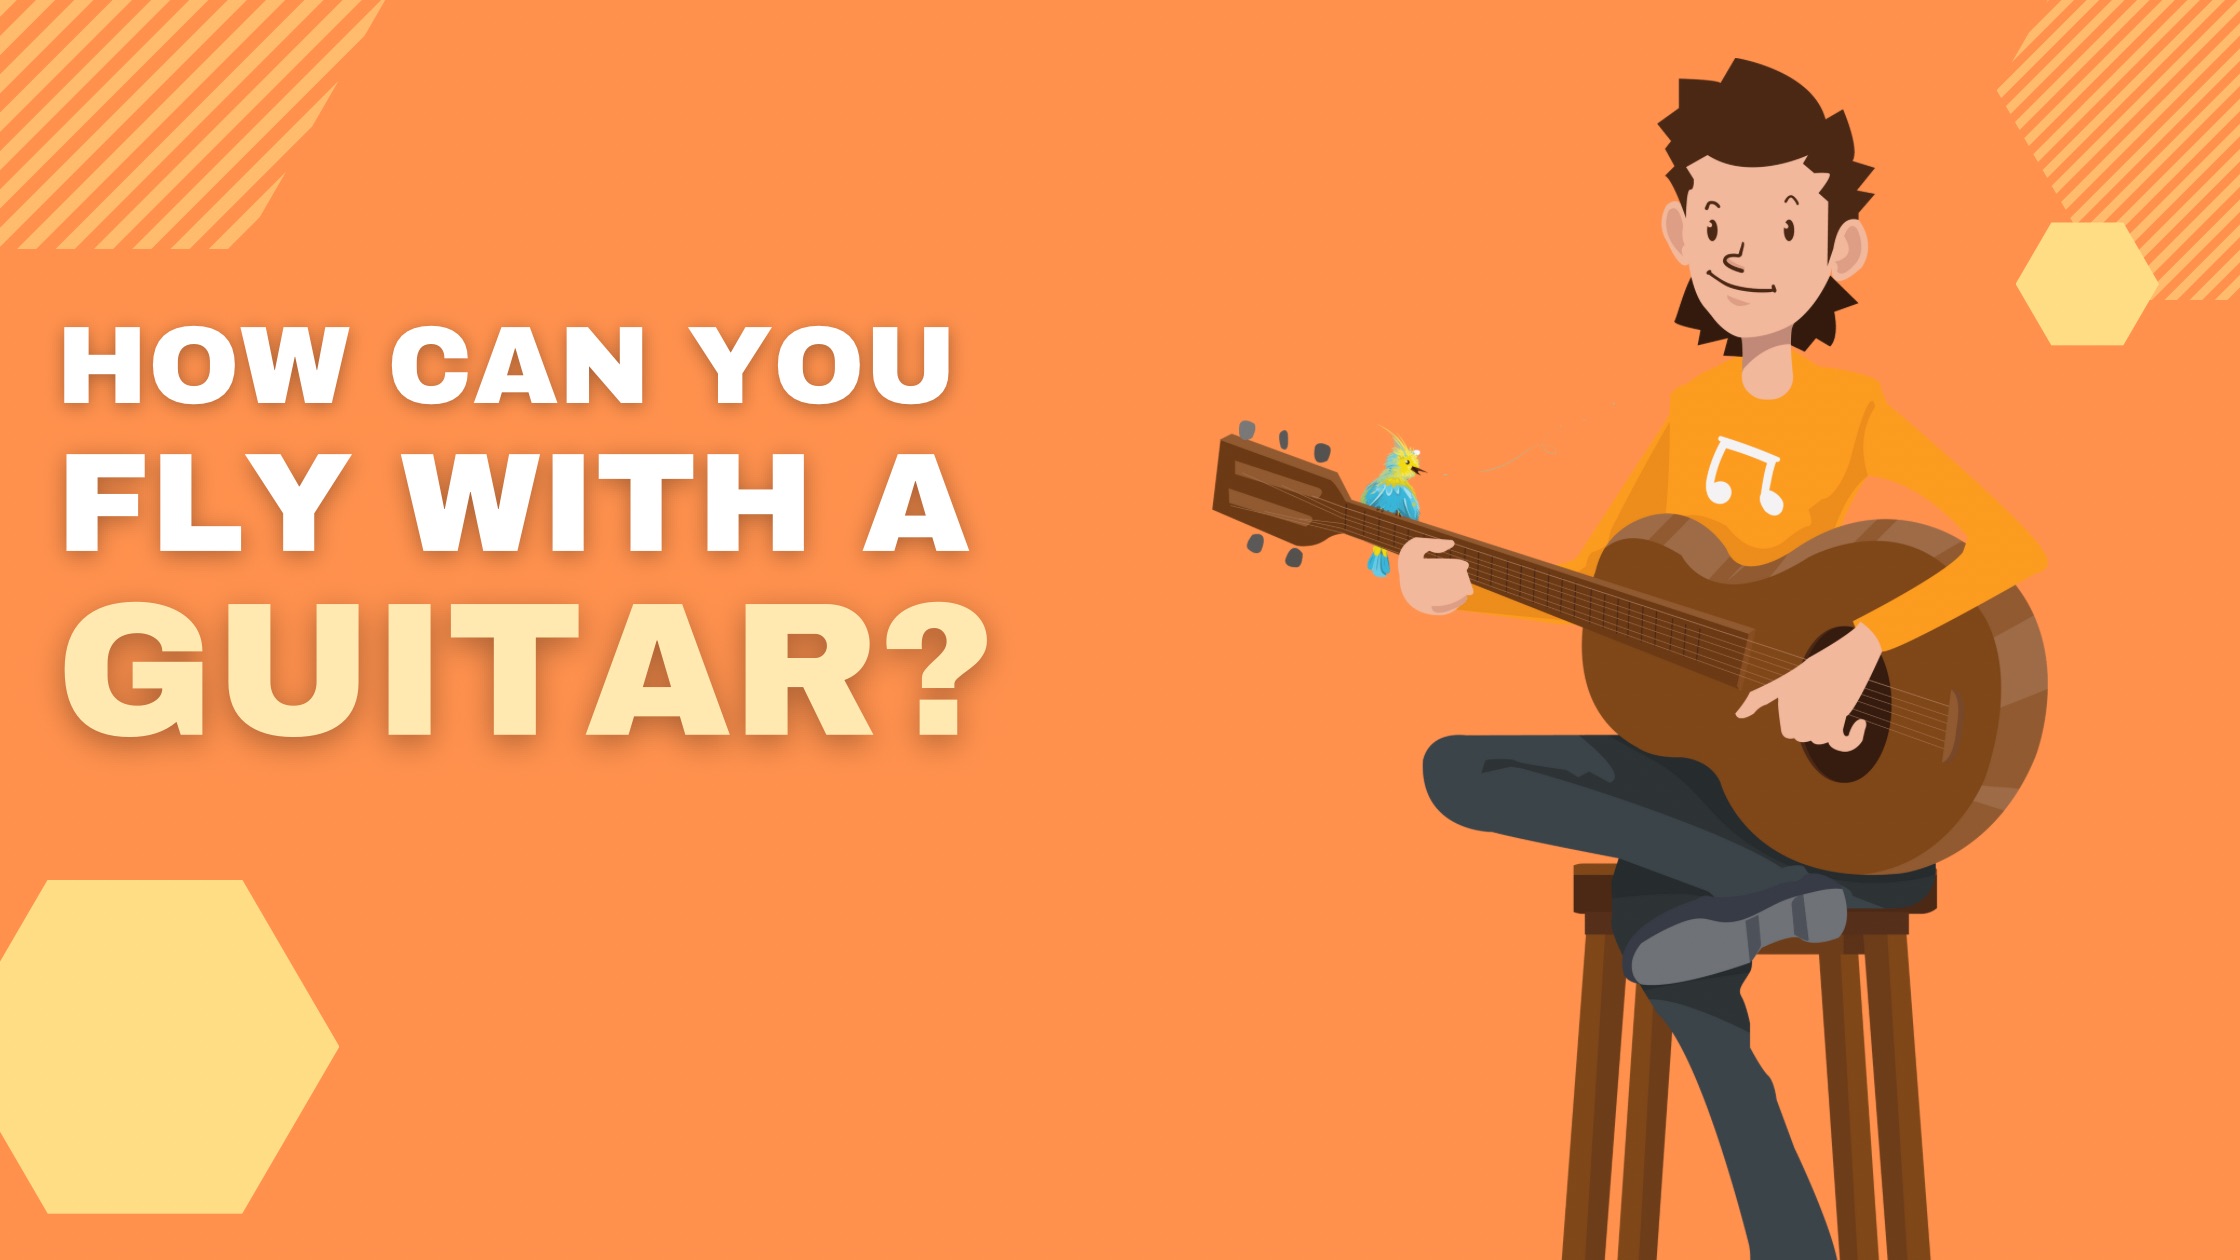 How can you fly with a guitar?